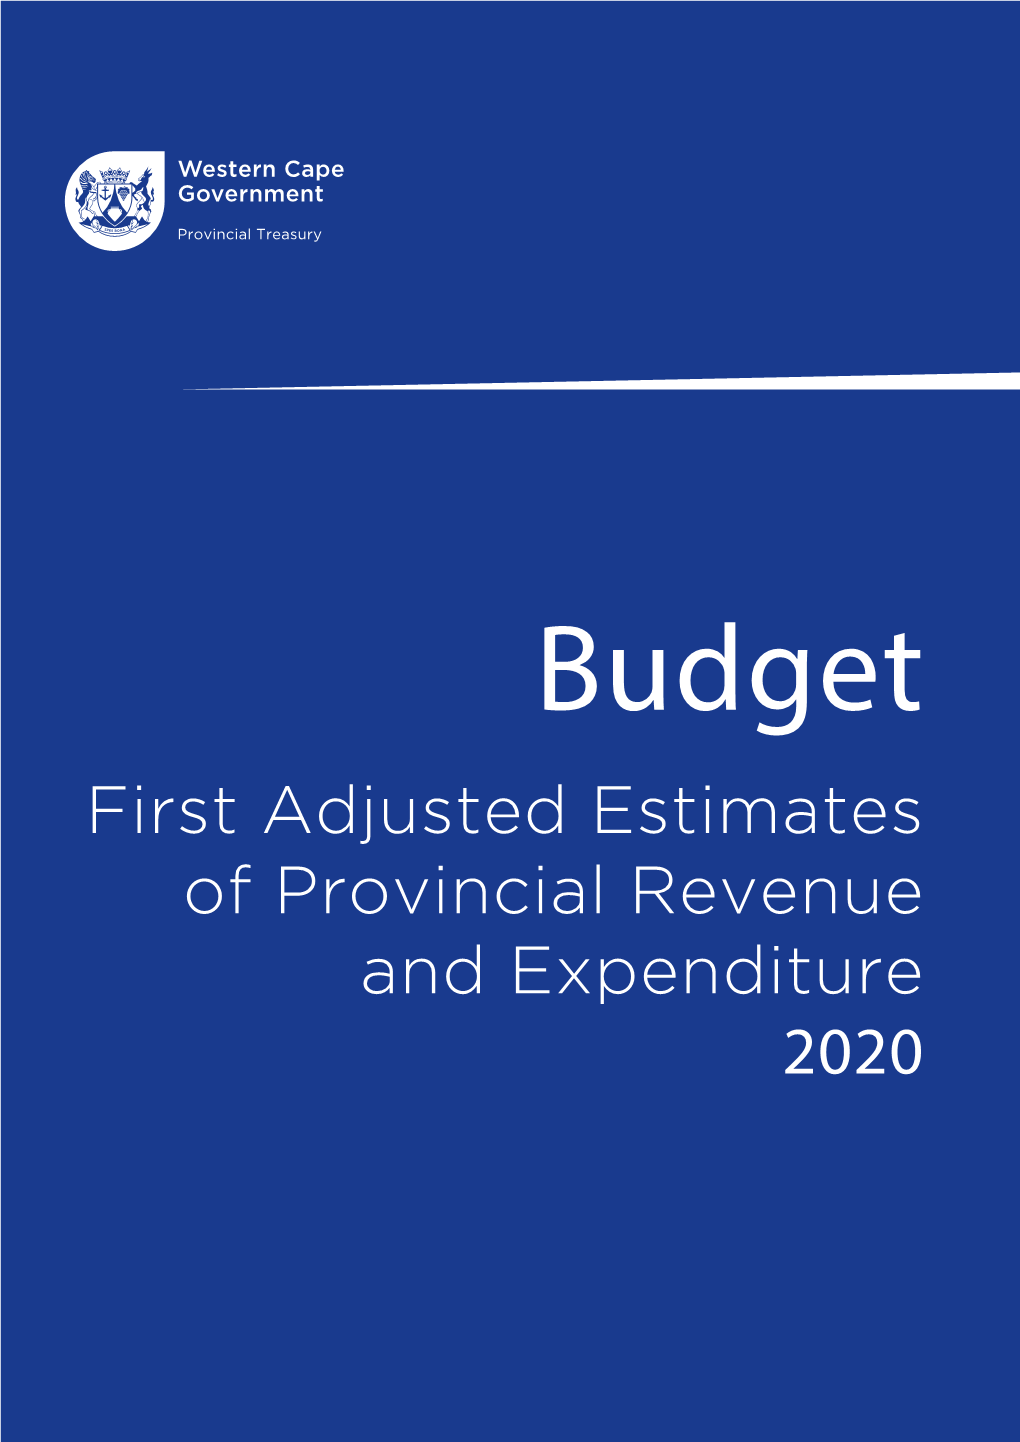 First Adjusted Estimates of Provincial Revenue and Expenditure 2020